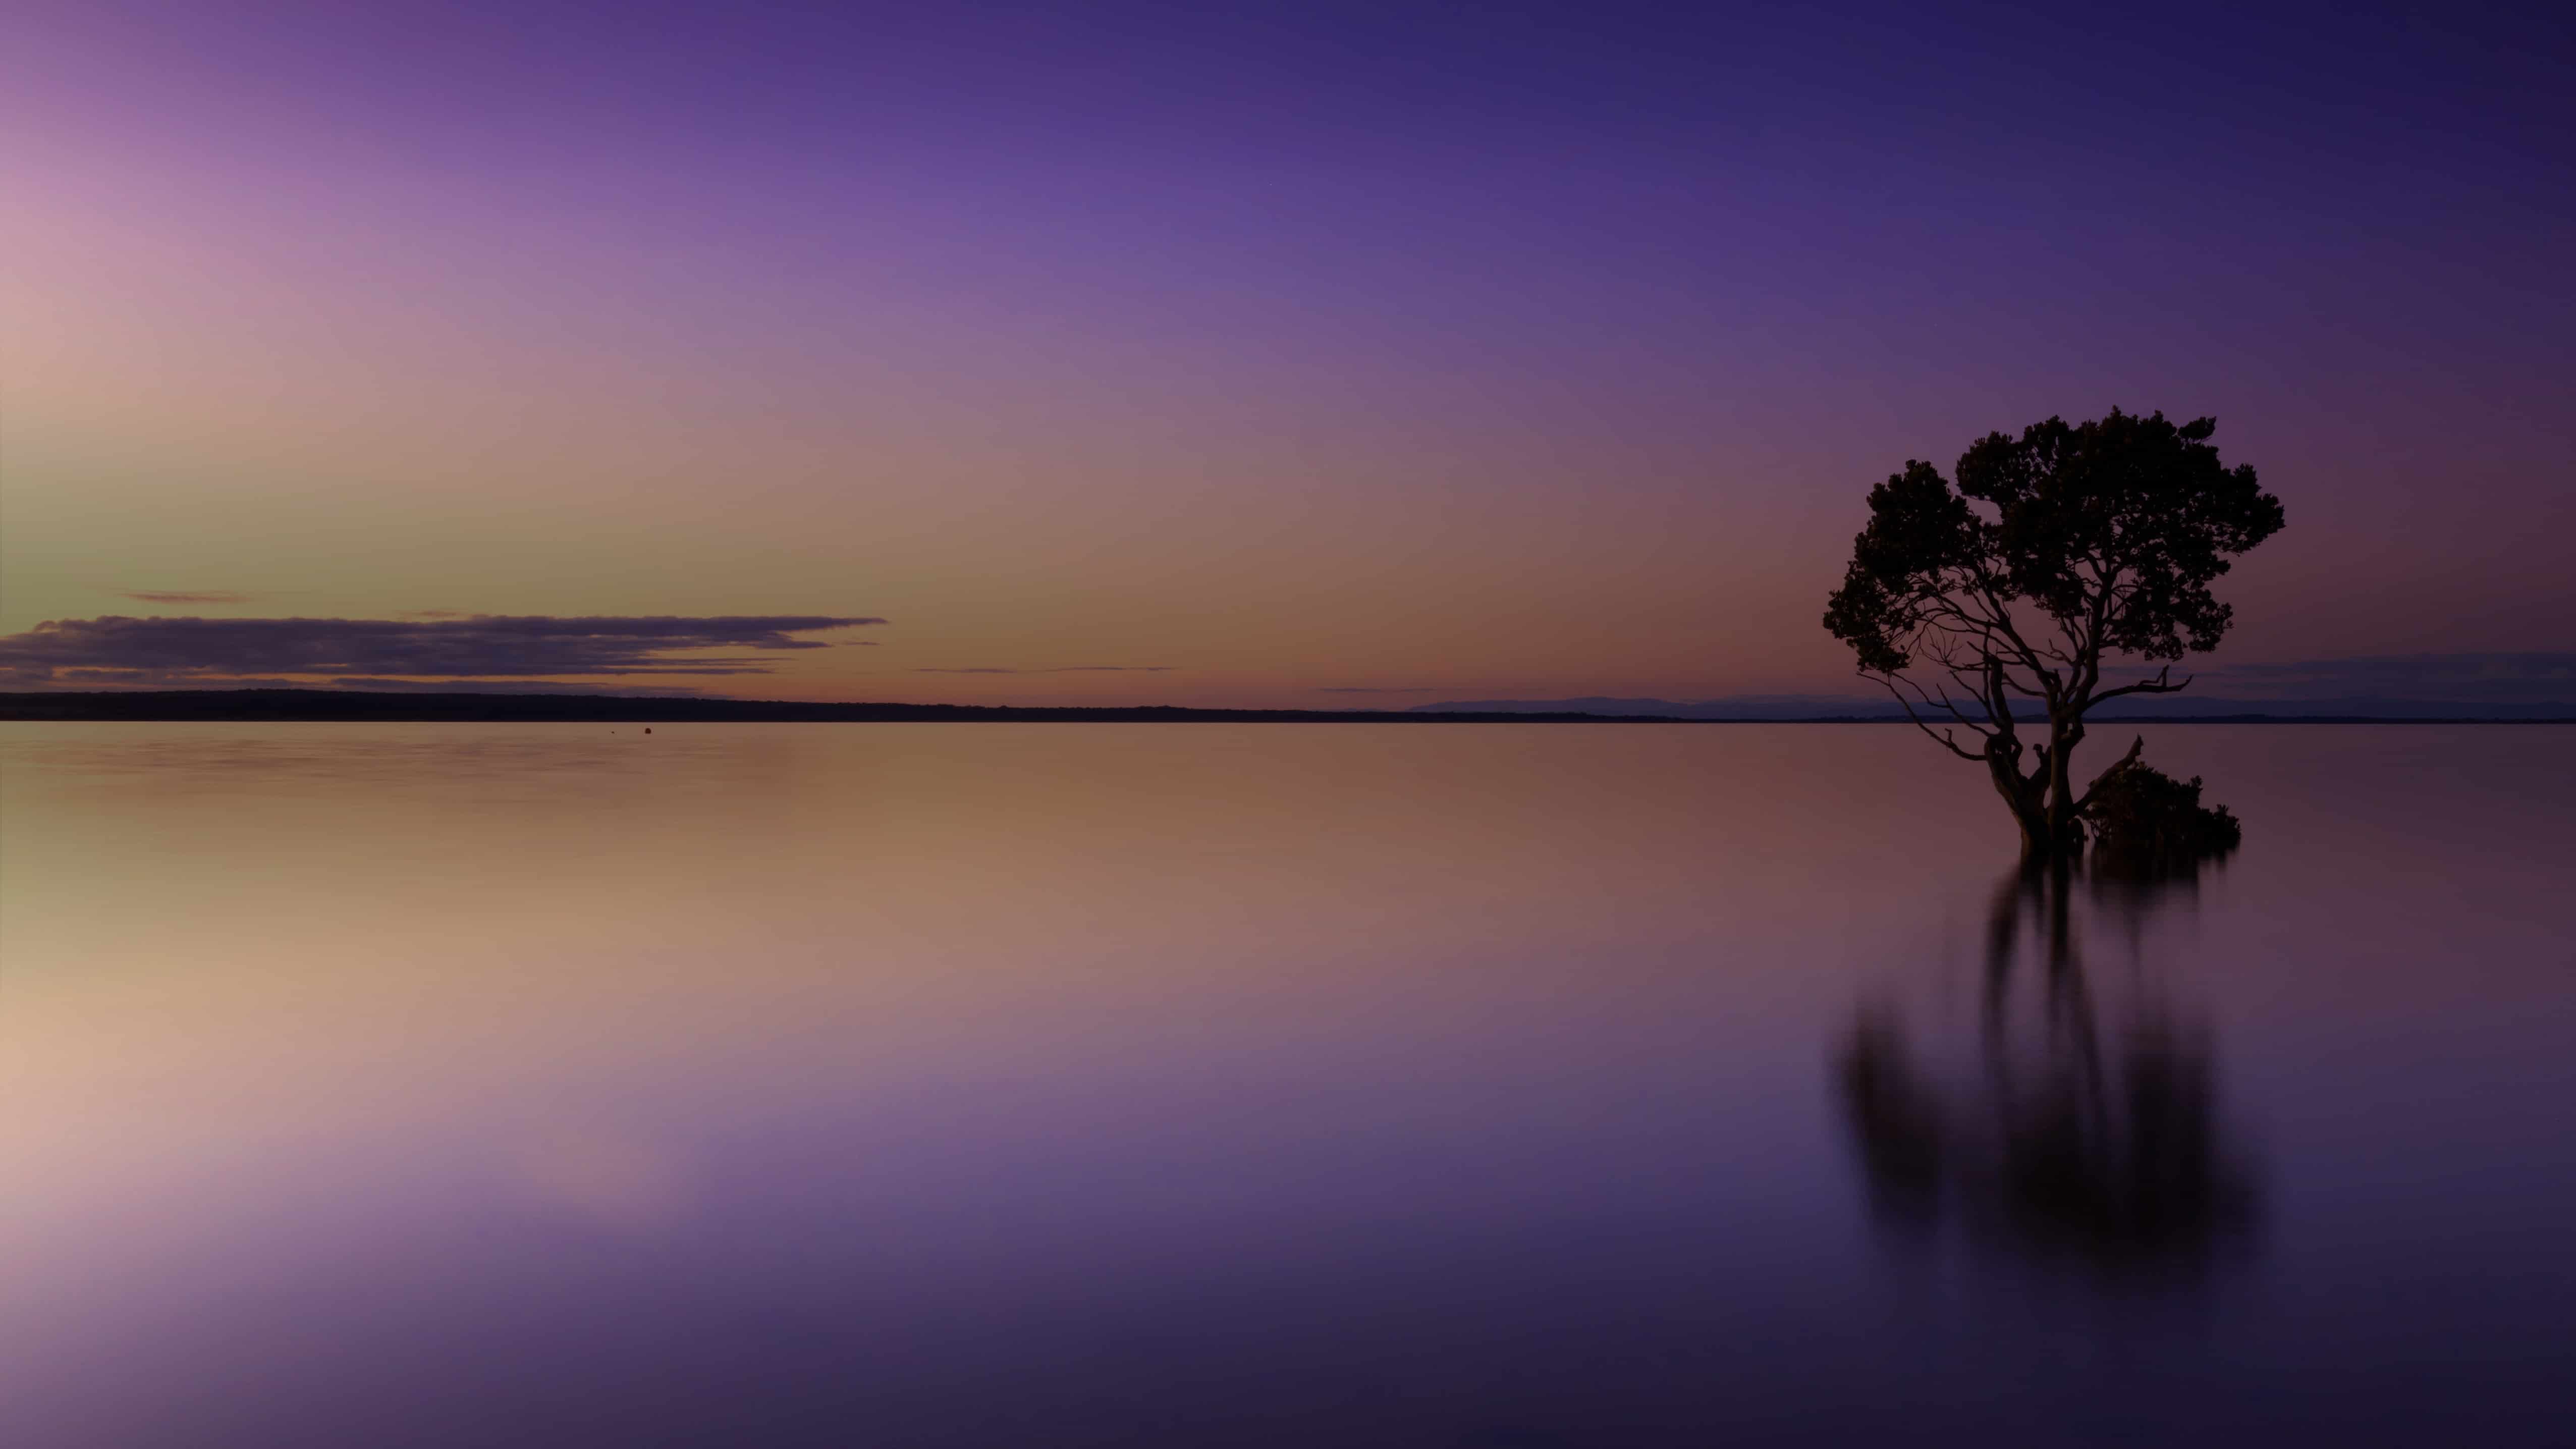 A tree in the middle of water at dusk.